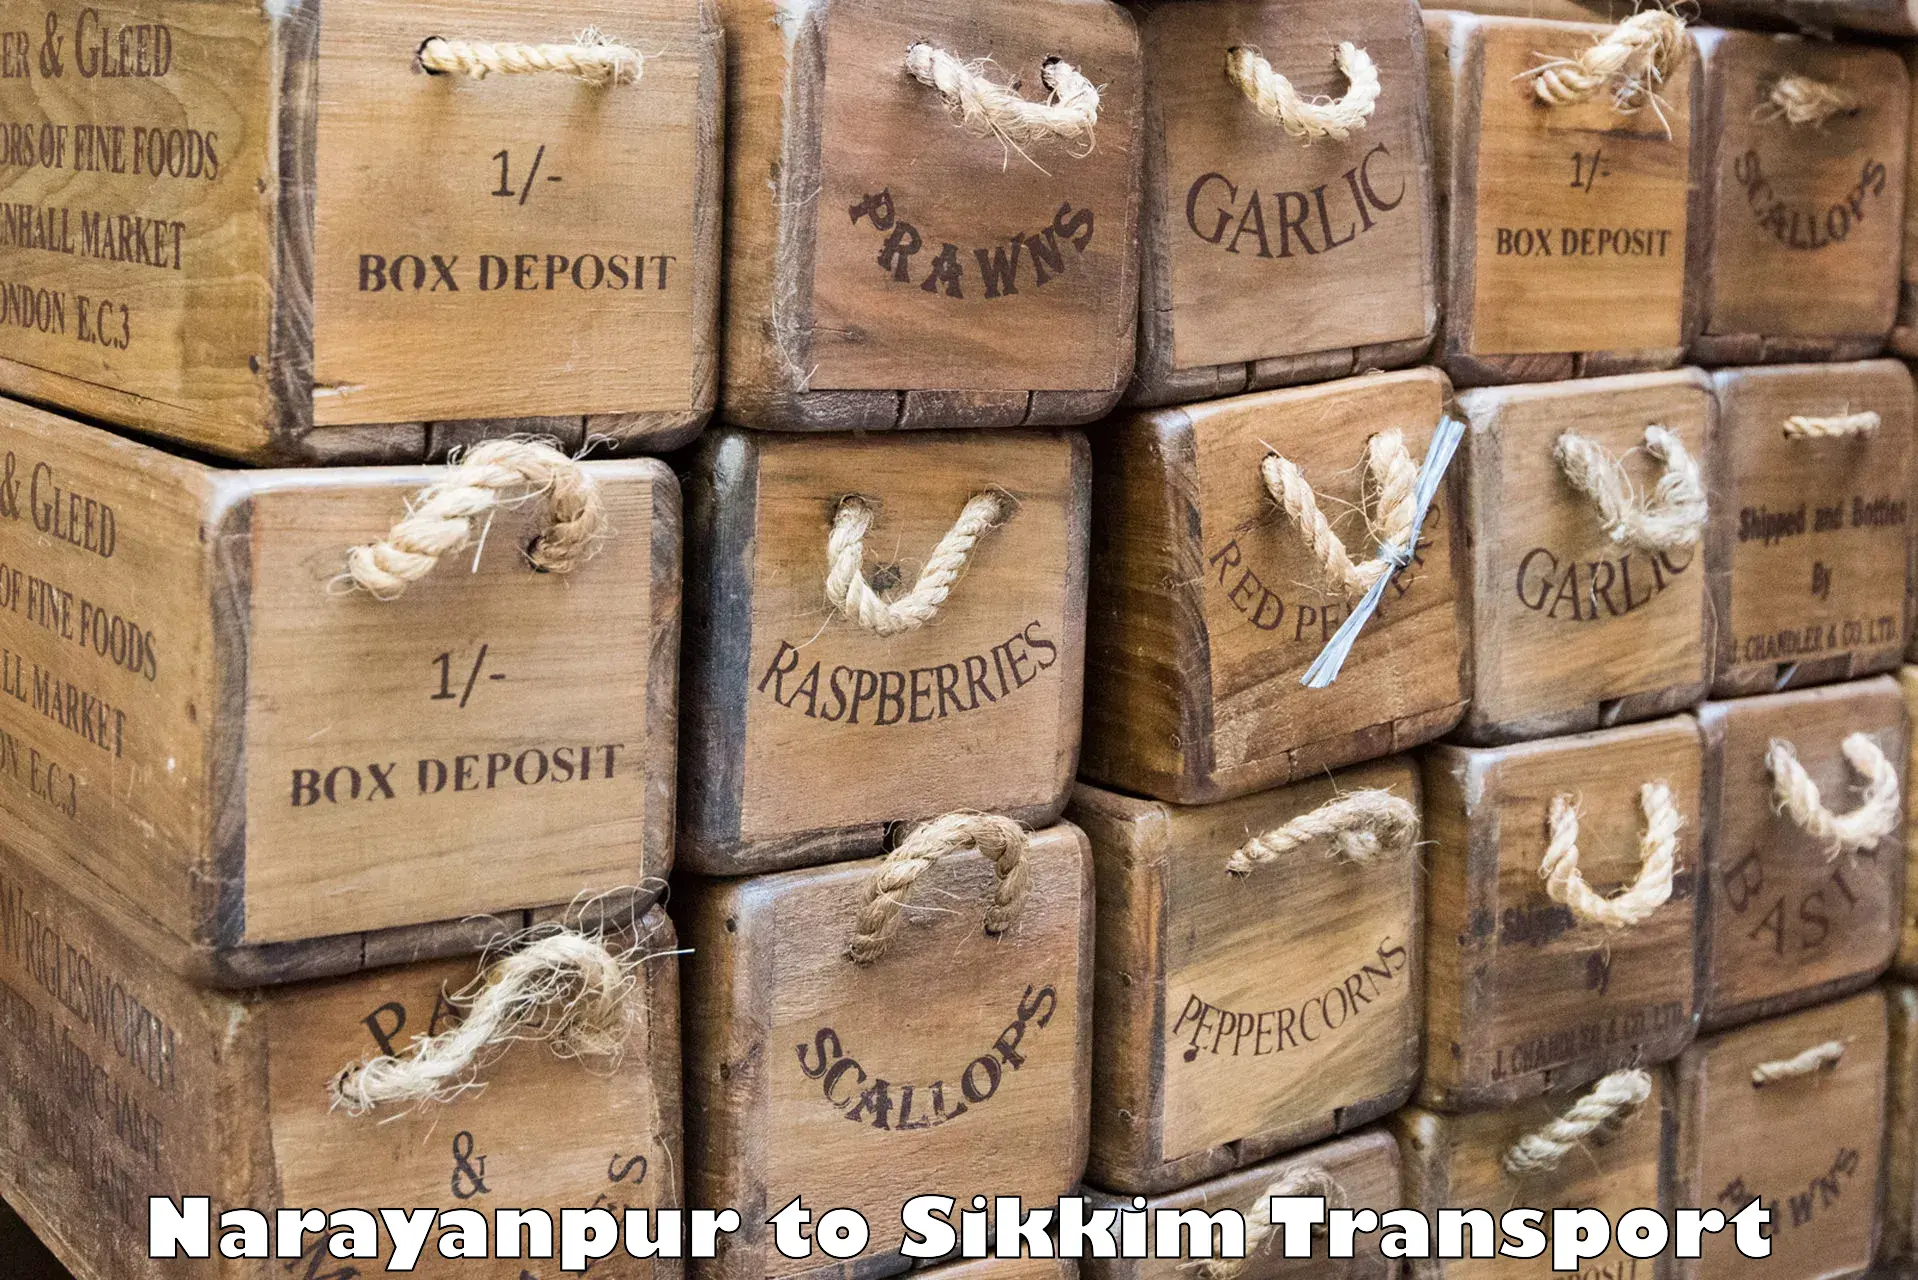 Air freight transport services Narayanpur to Mangan